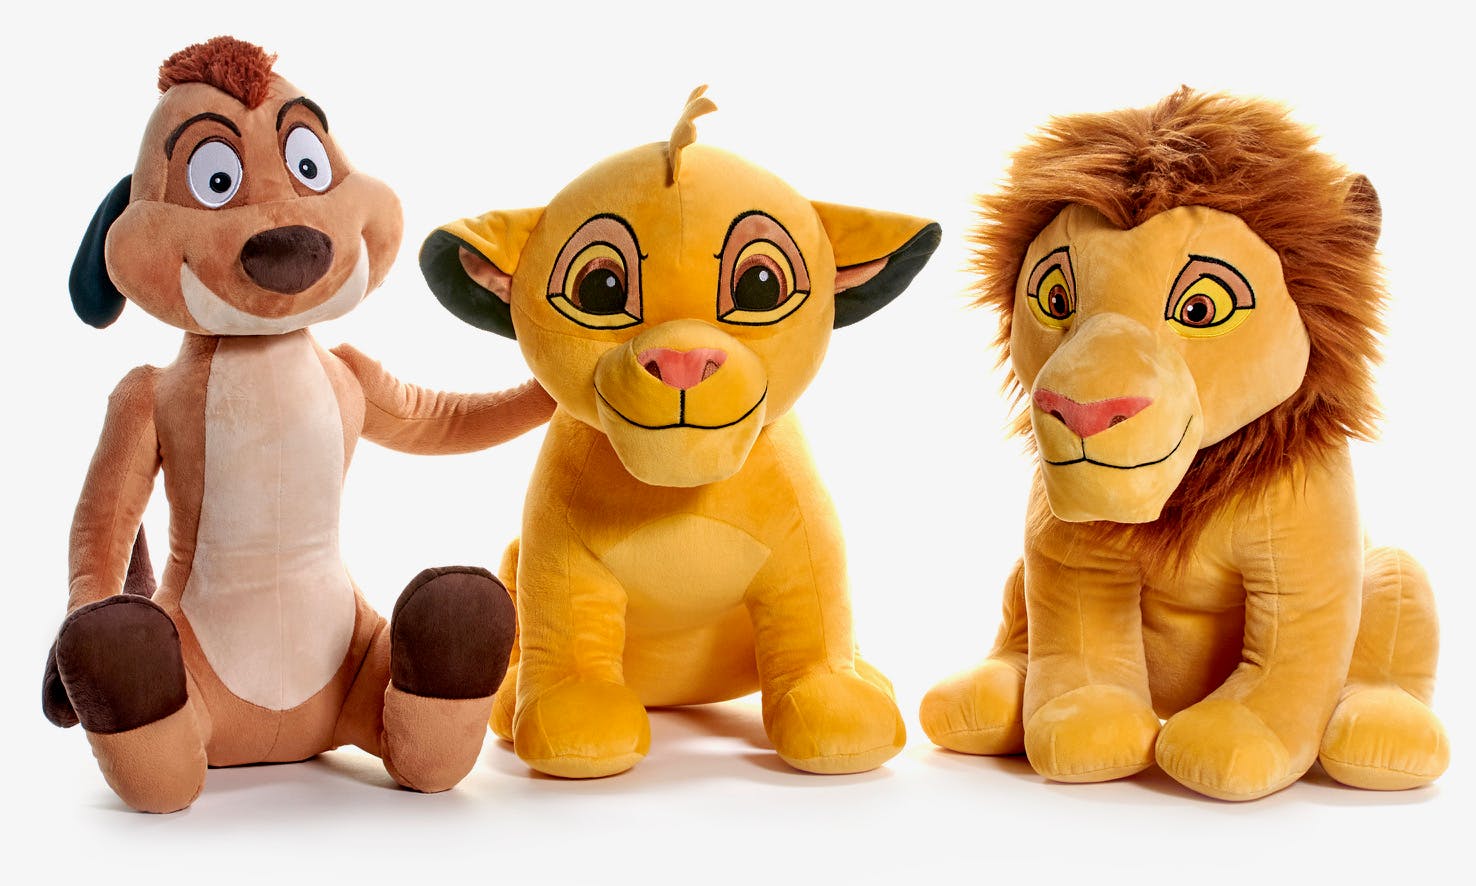 Product - Lion king 3 Assorted